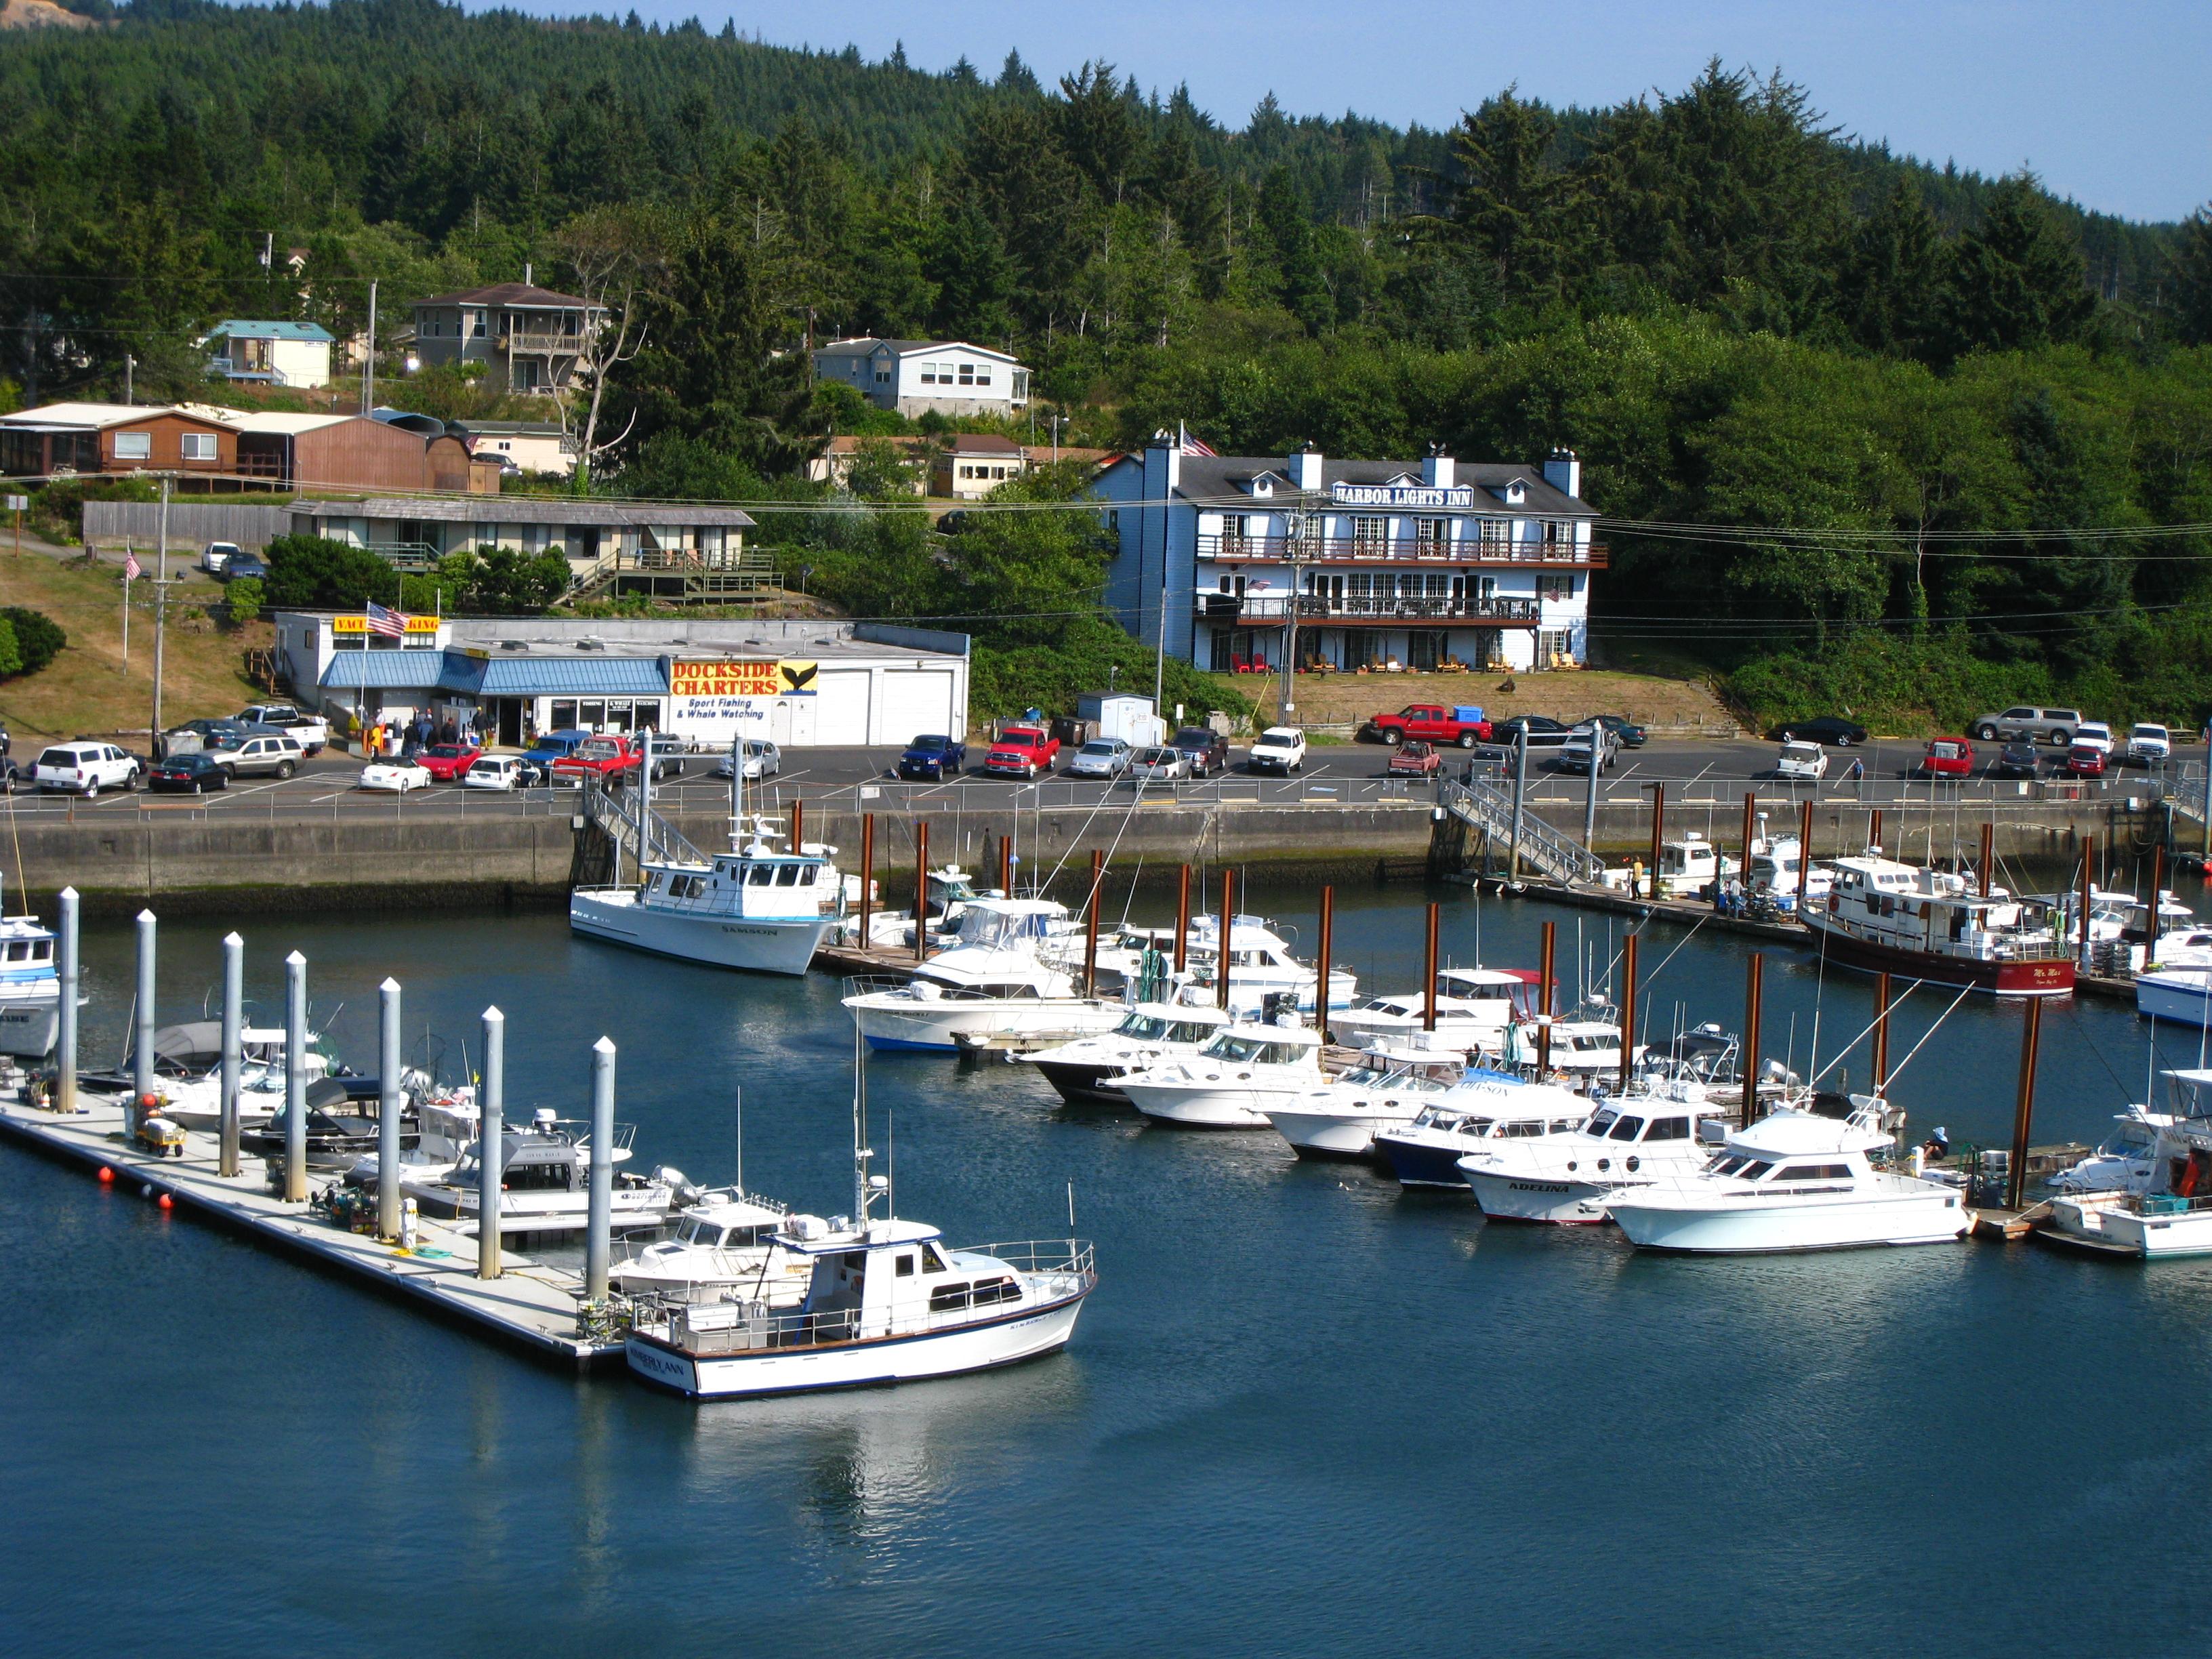 Depoe Bay is on the Oregon coast, a little village that's noted for whale-watching, for its spouting horns and has the smallest navigable harbor in the world.